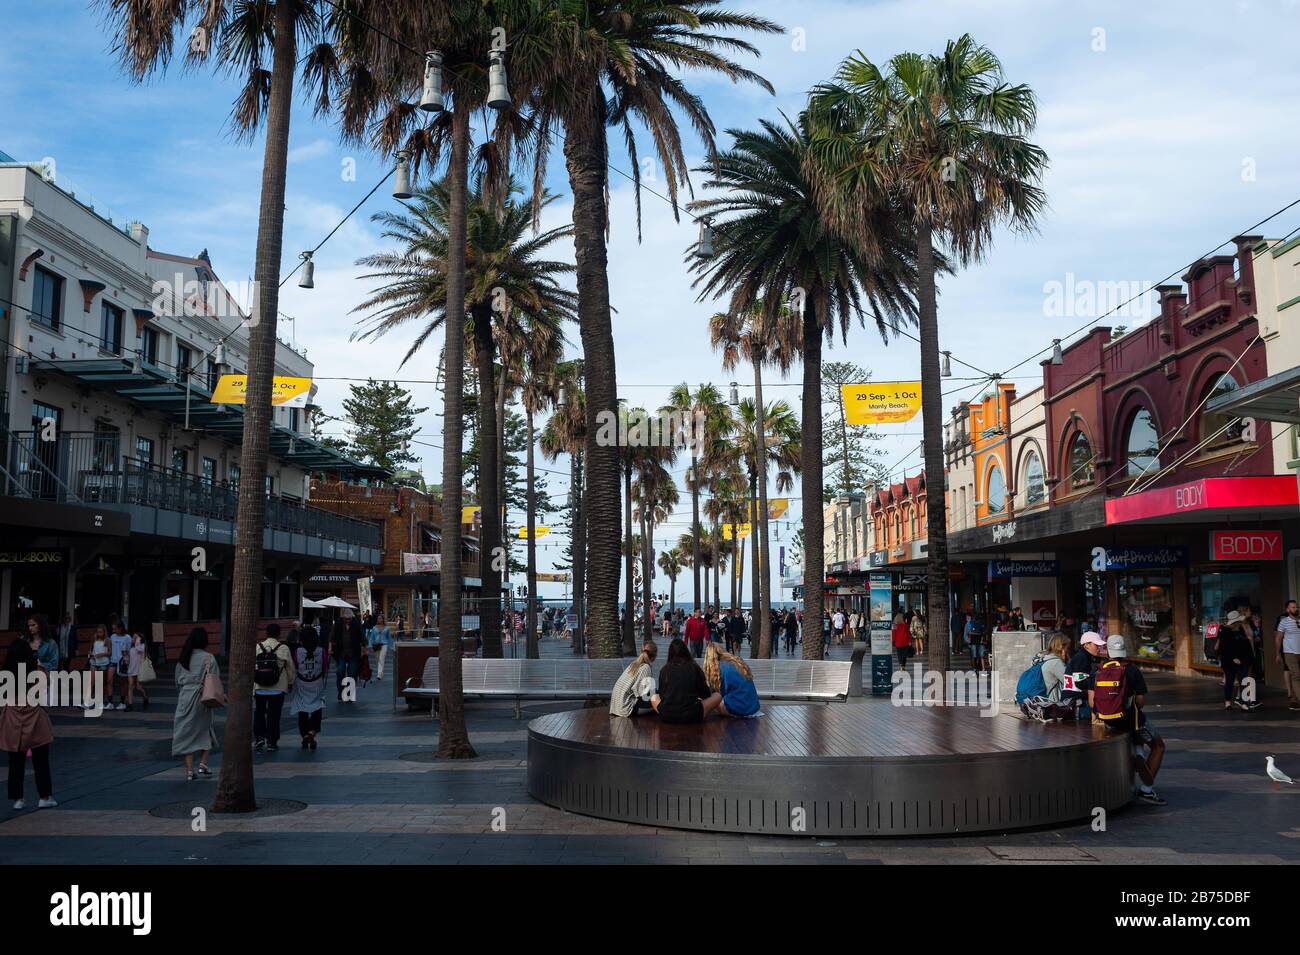 22.09.2018, Sydney, New South Wales, Australia - People stroll along Manly Corso, a shopping and pedestrian area in a north-eastern beach suburb of Sydney. [automated translation] Stock Photo